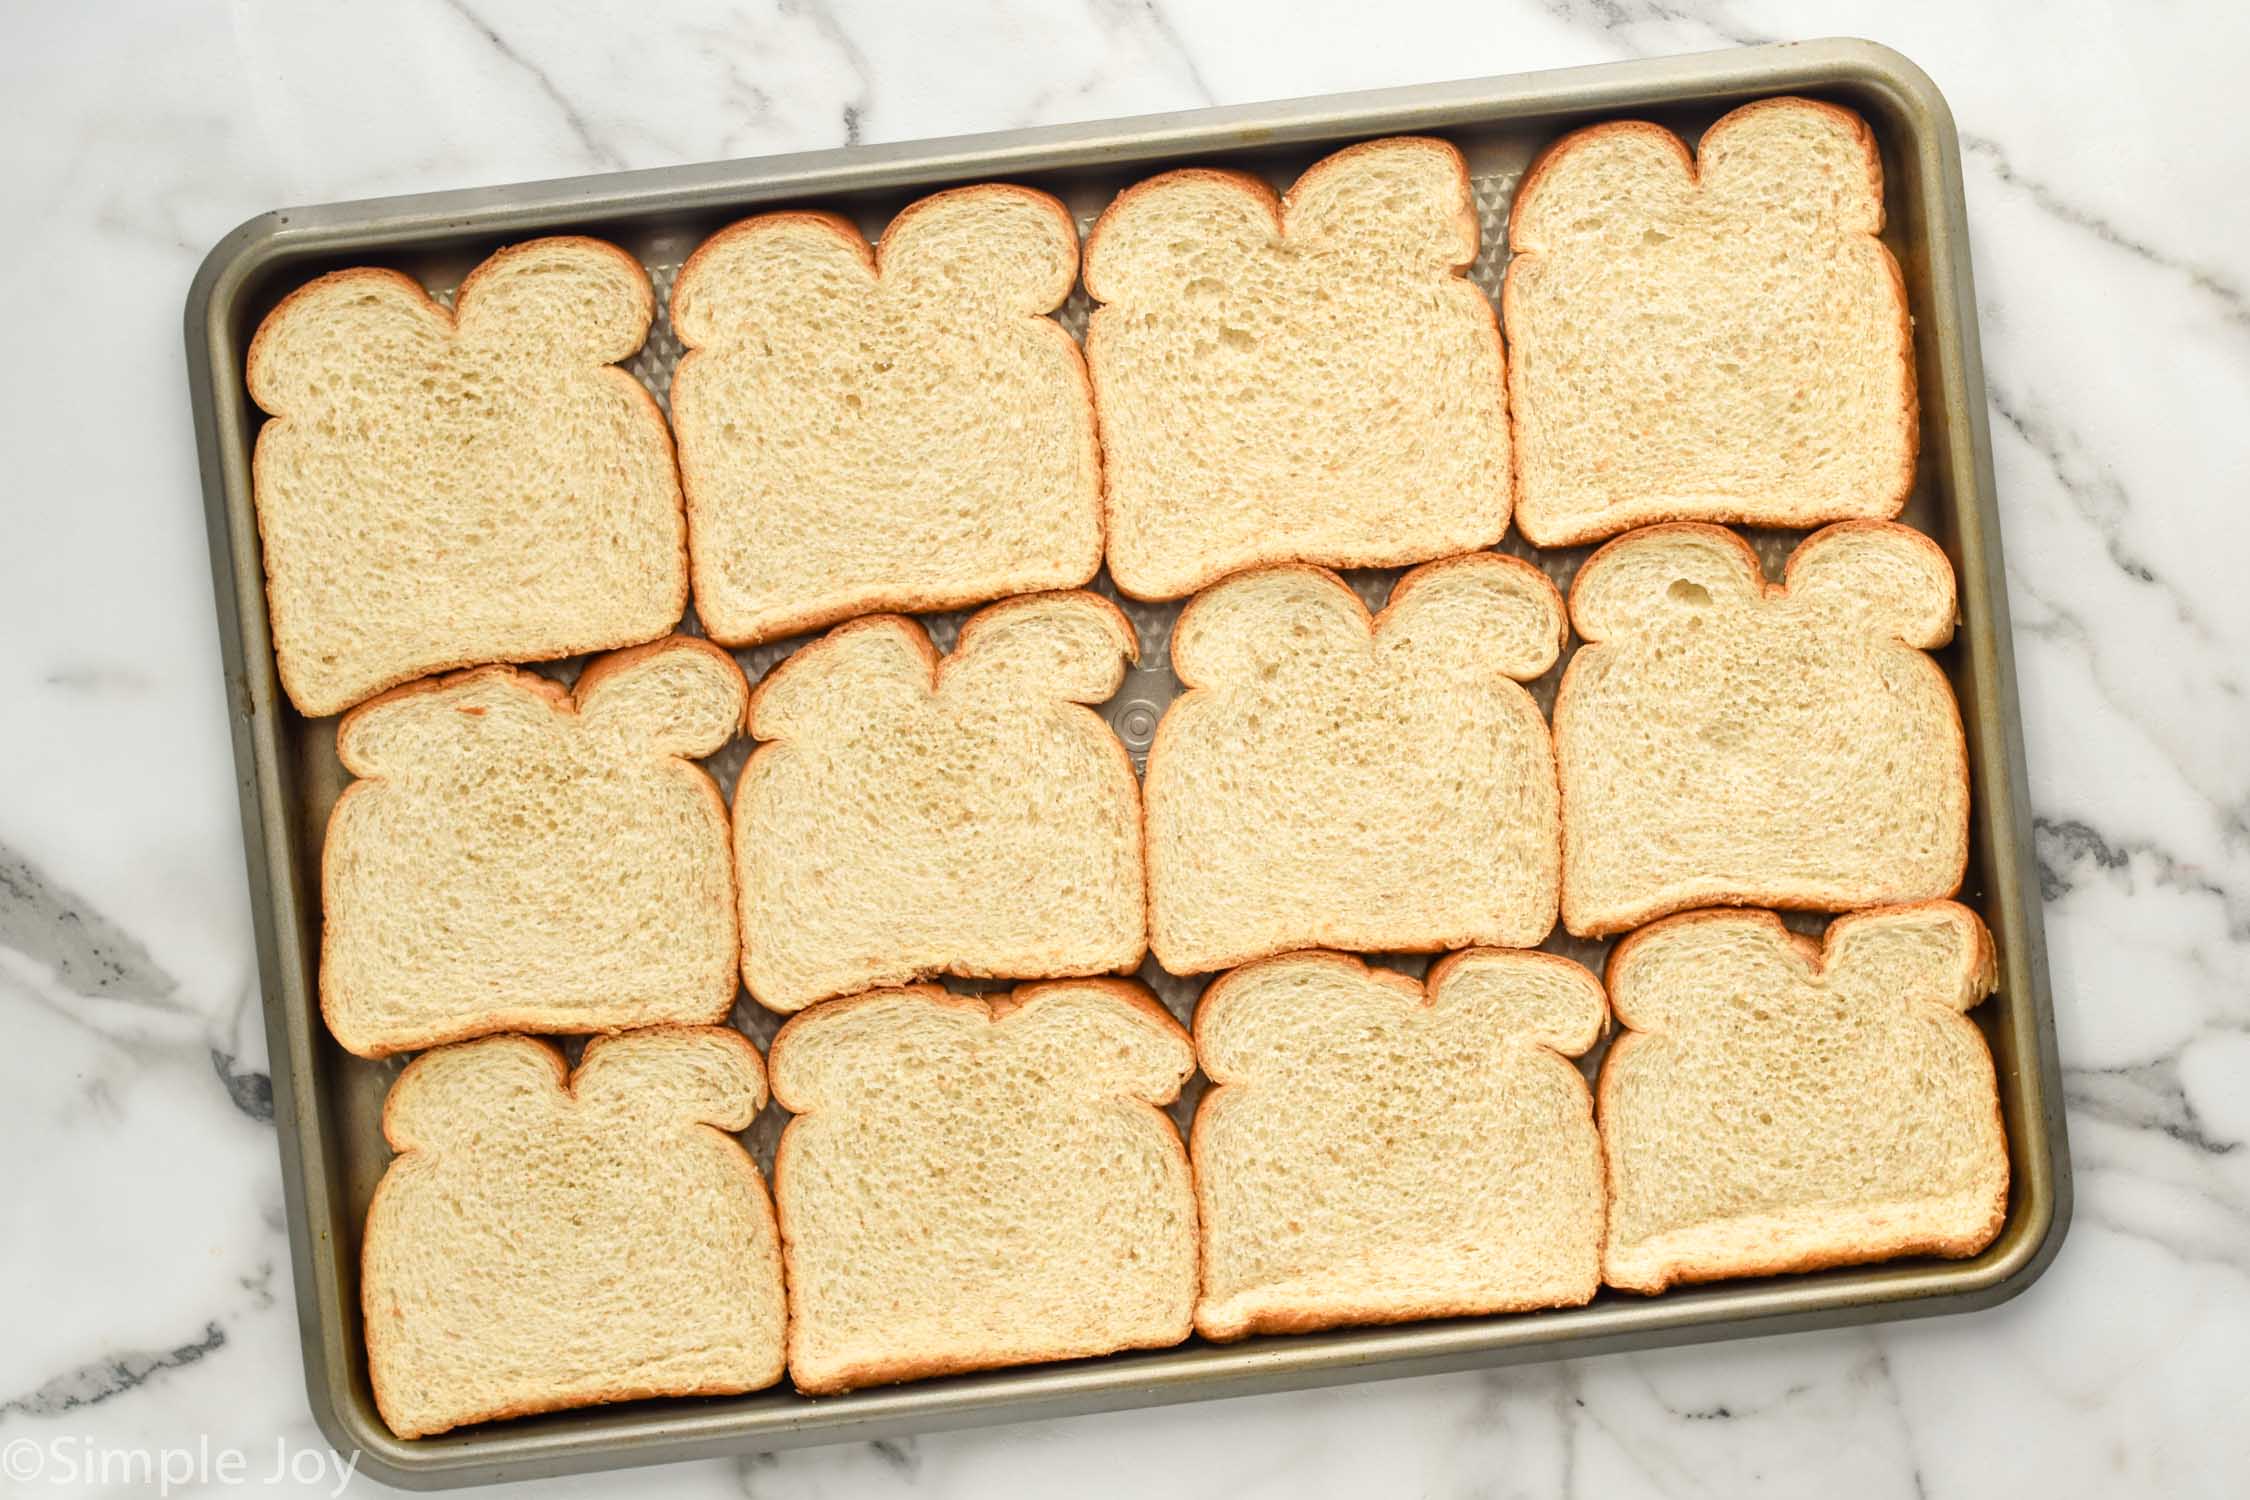 Overhead photo of a baking sheet with slices of bread for Breadcrumbs recipe.